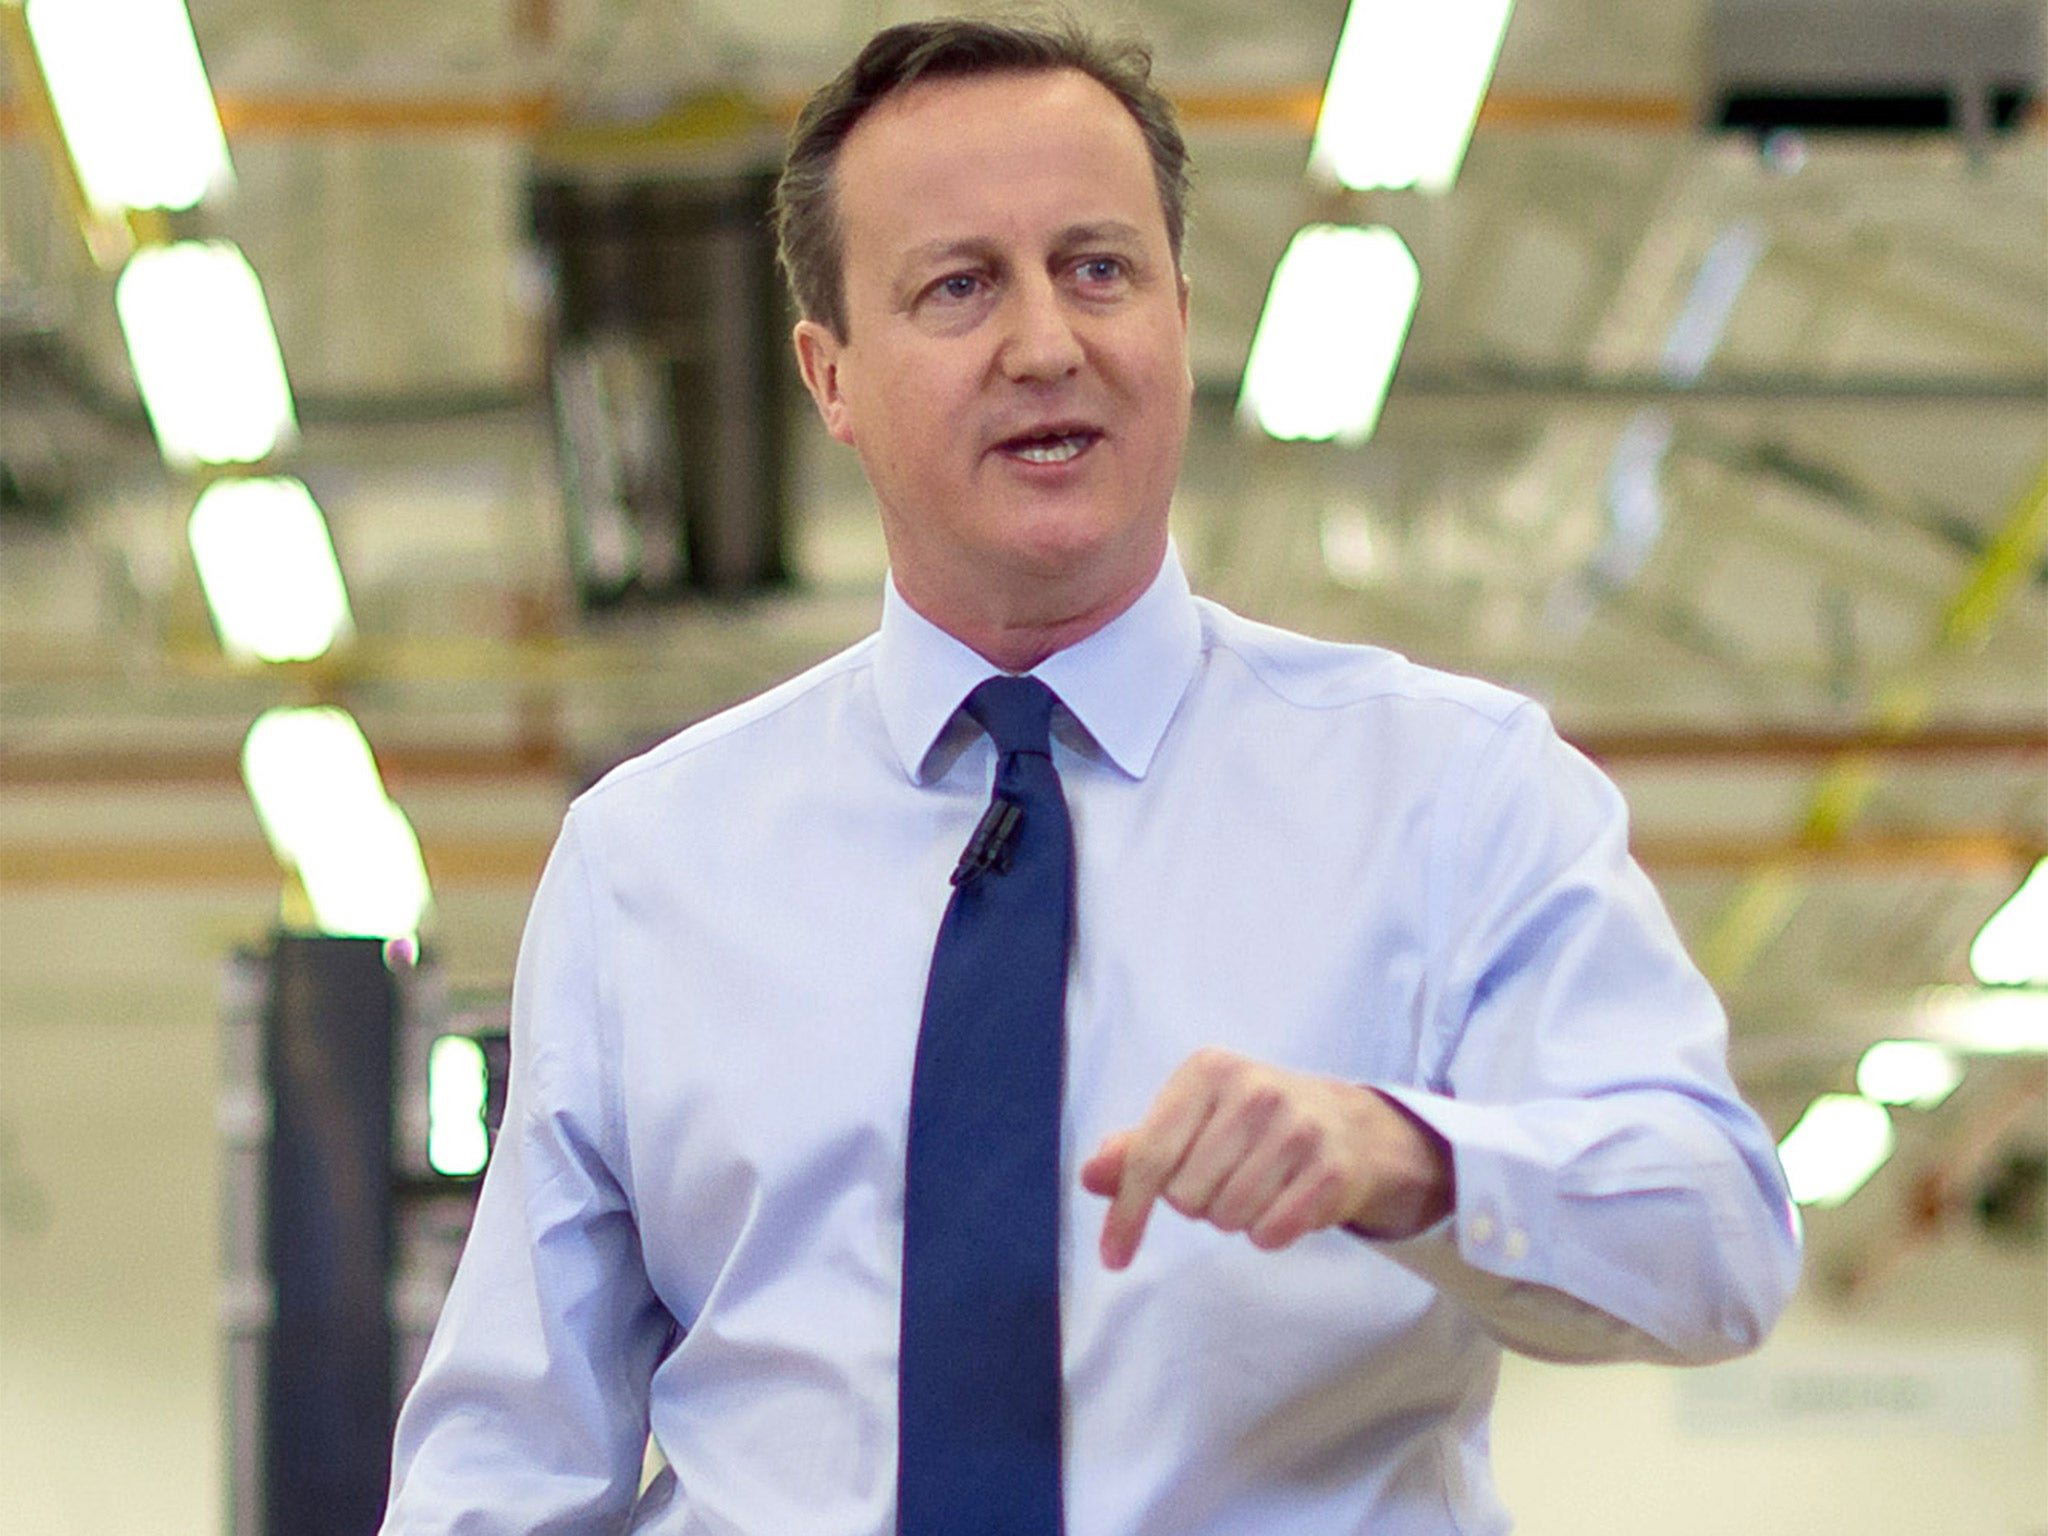 David Cameron is hoping to raise aid contributions from other countries